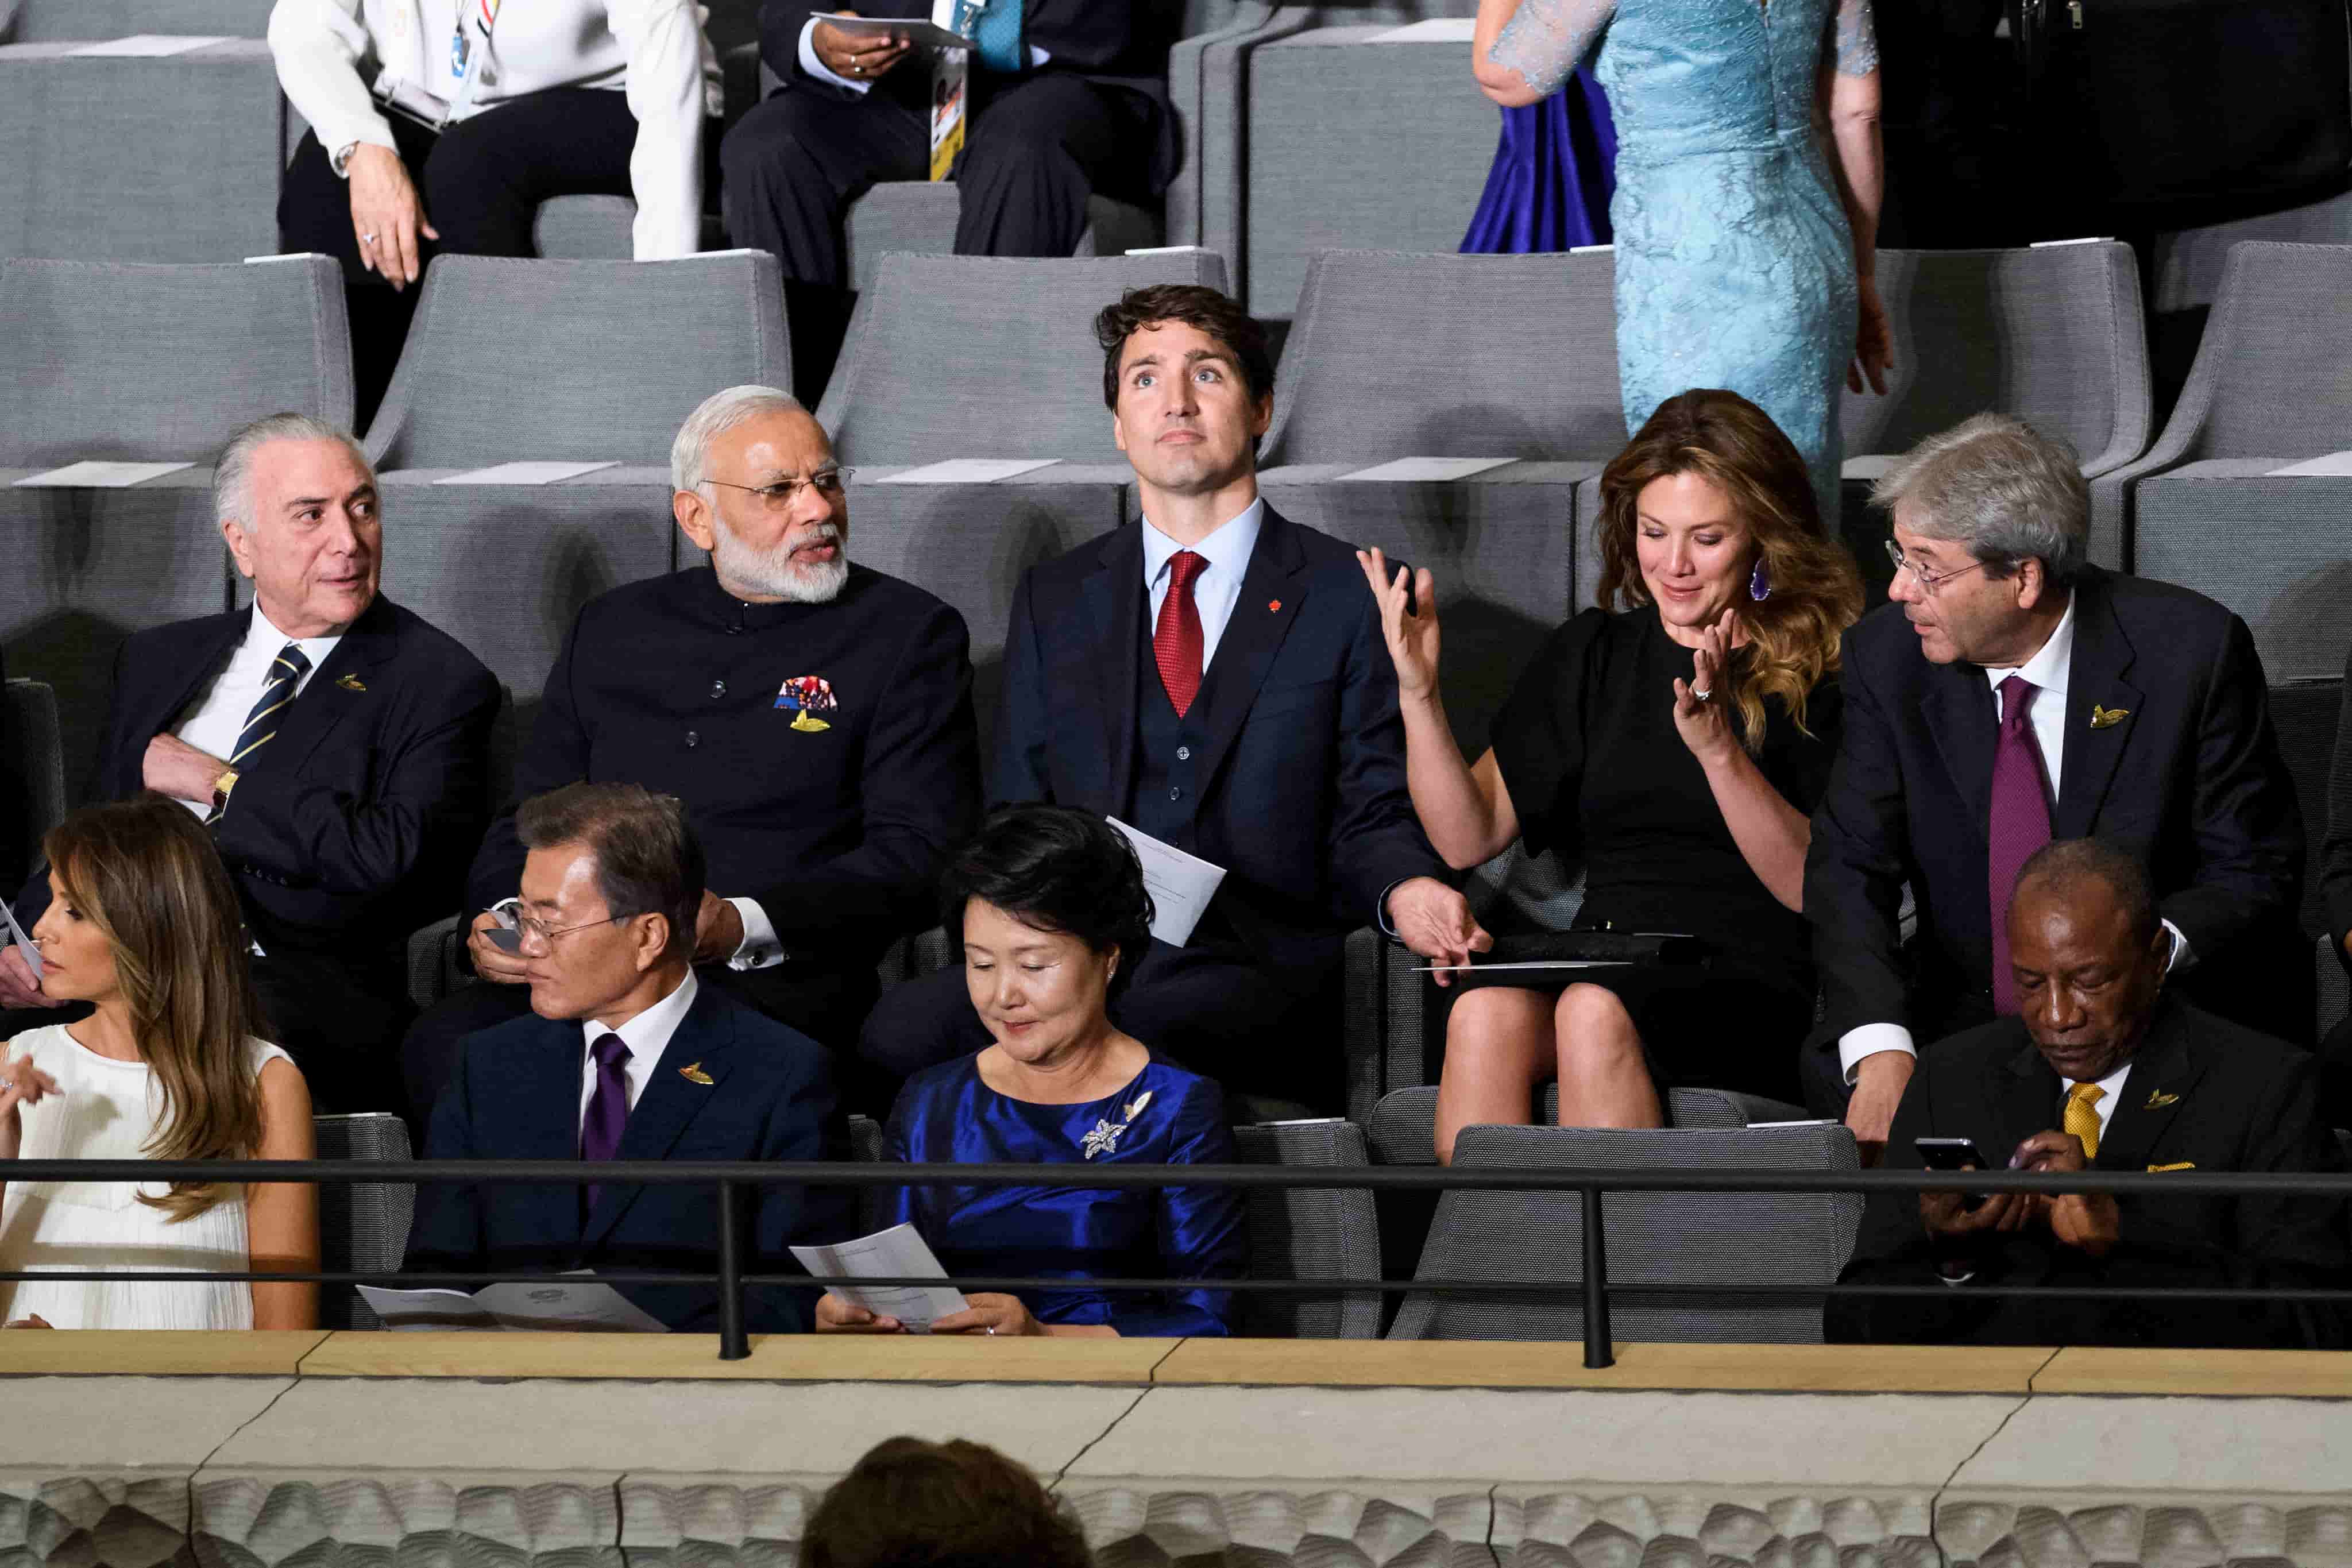 India Summons Canadian Envoy Over "Khalistan" Slogans at Trudeau Event